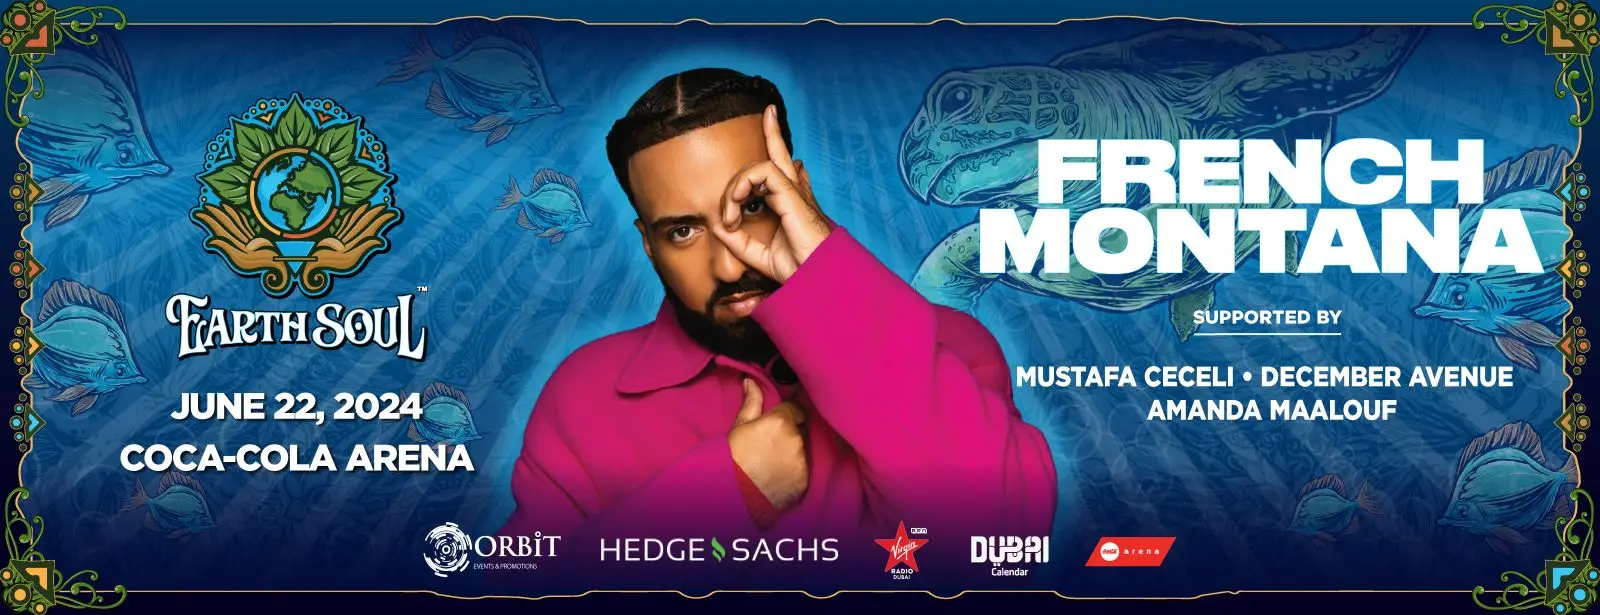 Earthsoul with French Montana Live at Coca-Cola Arena, Dubai || Wow-Emirates